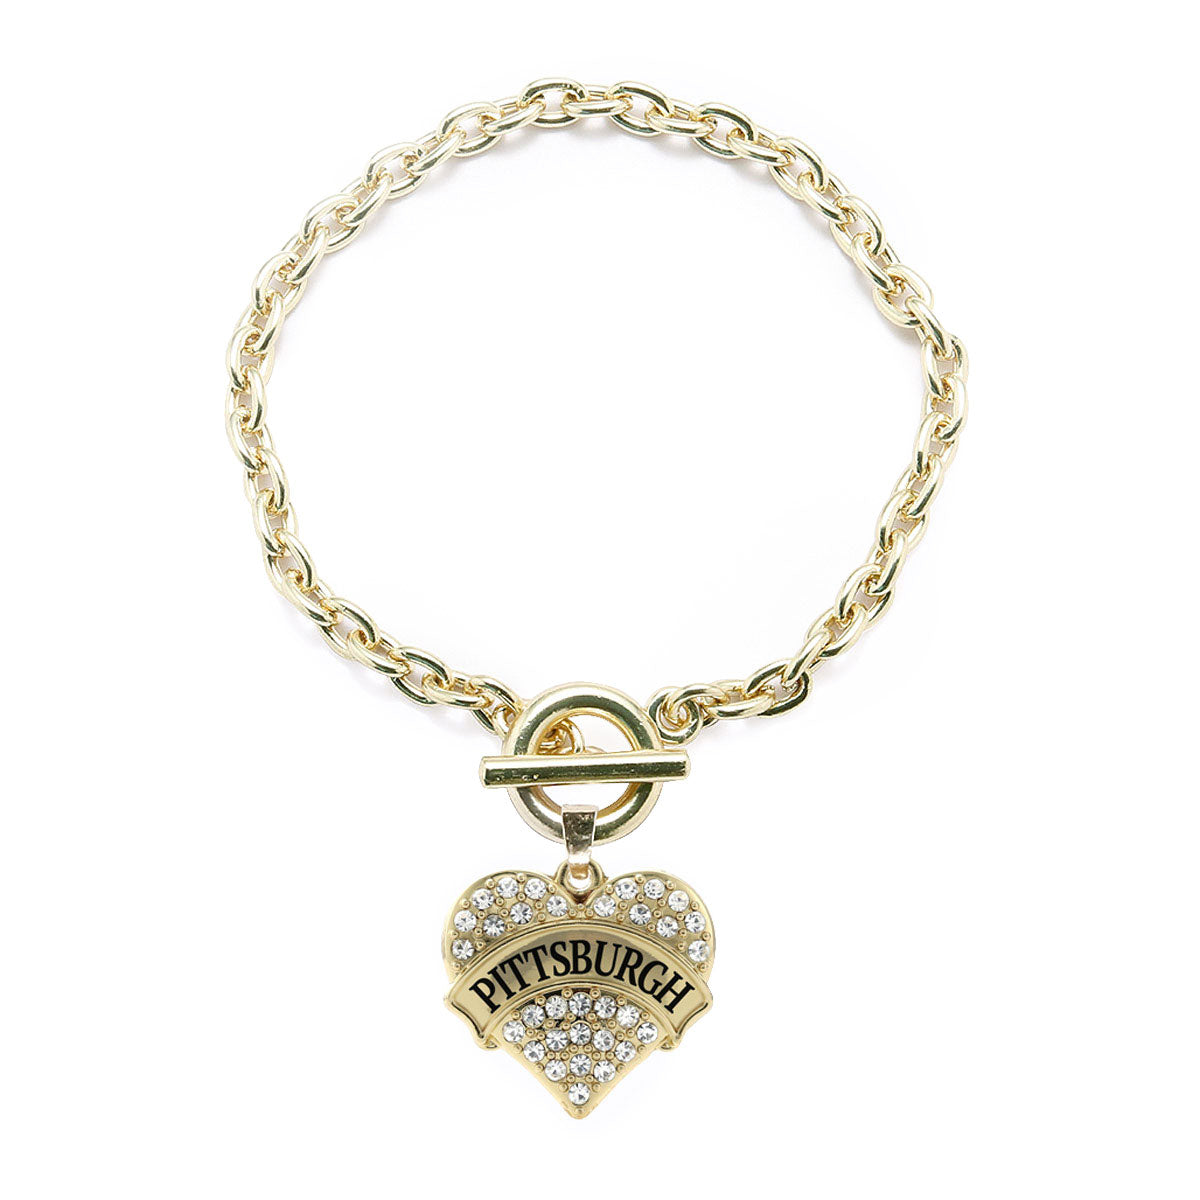 Gold Pittsburgh Pave Heart Charm Toggle Bracelet